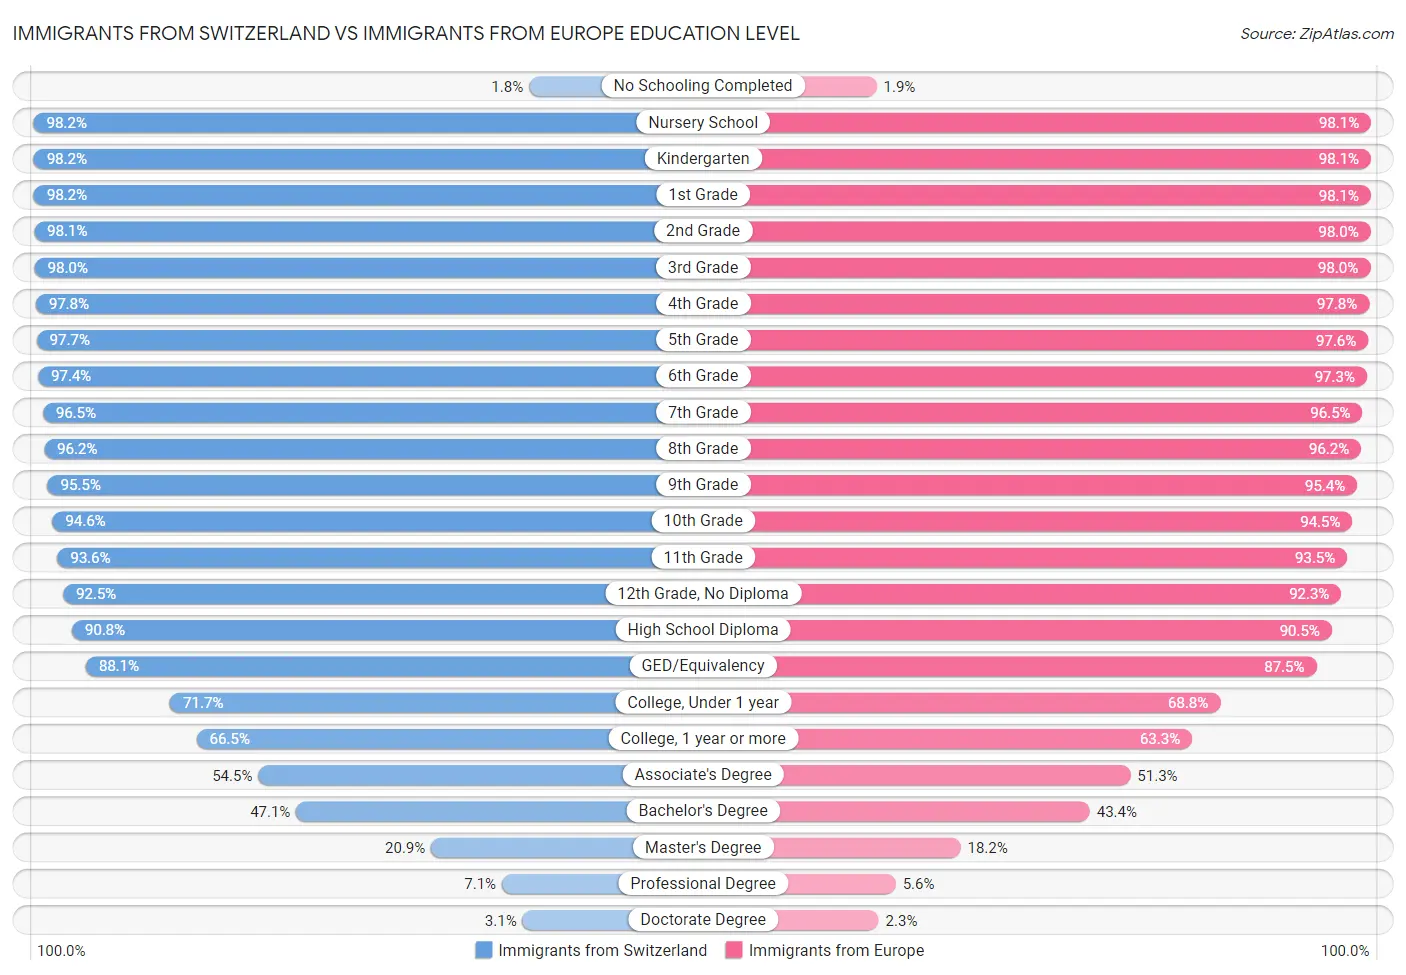 Immigrants from Switzerland vs Immigrants from Europe Education Level